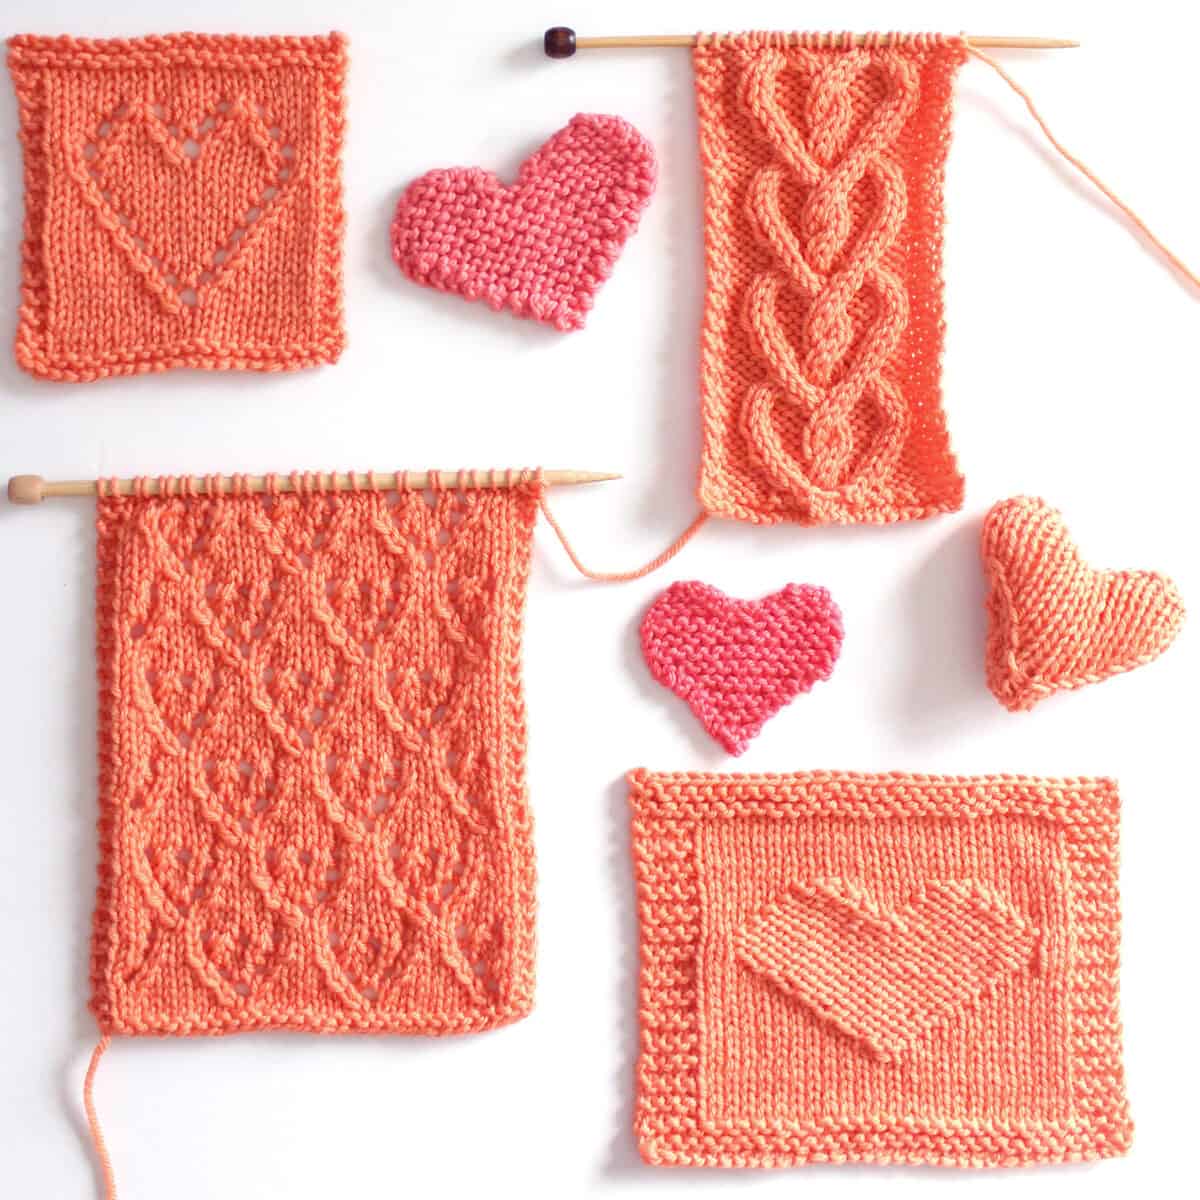 Knitted heart collection by Studio Knit in orange color yarn.